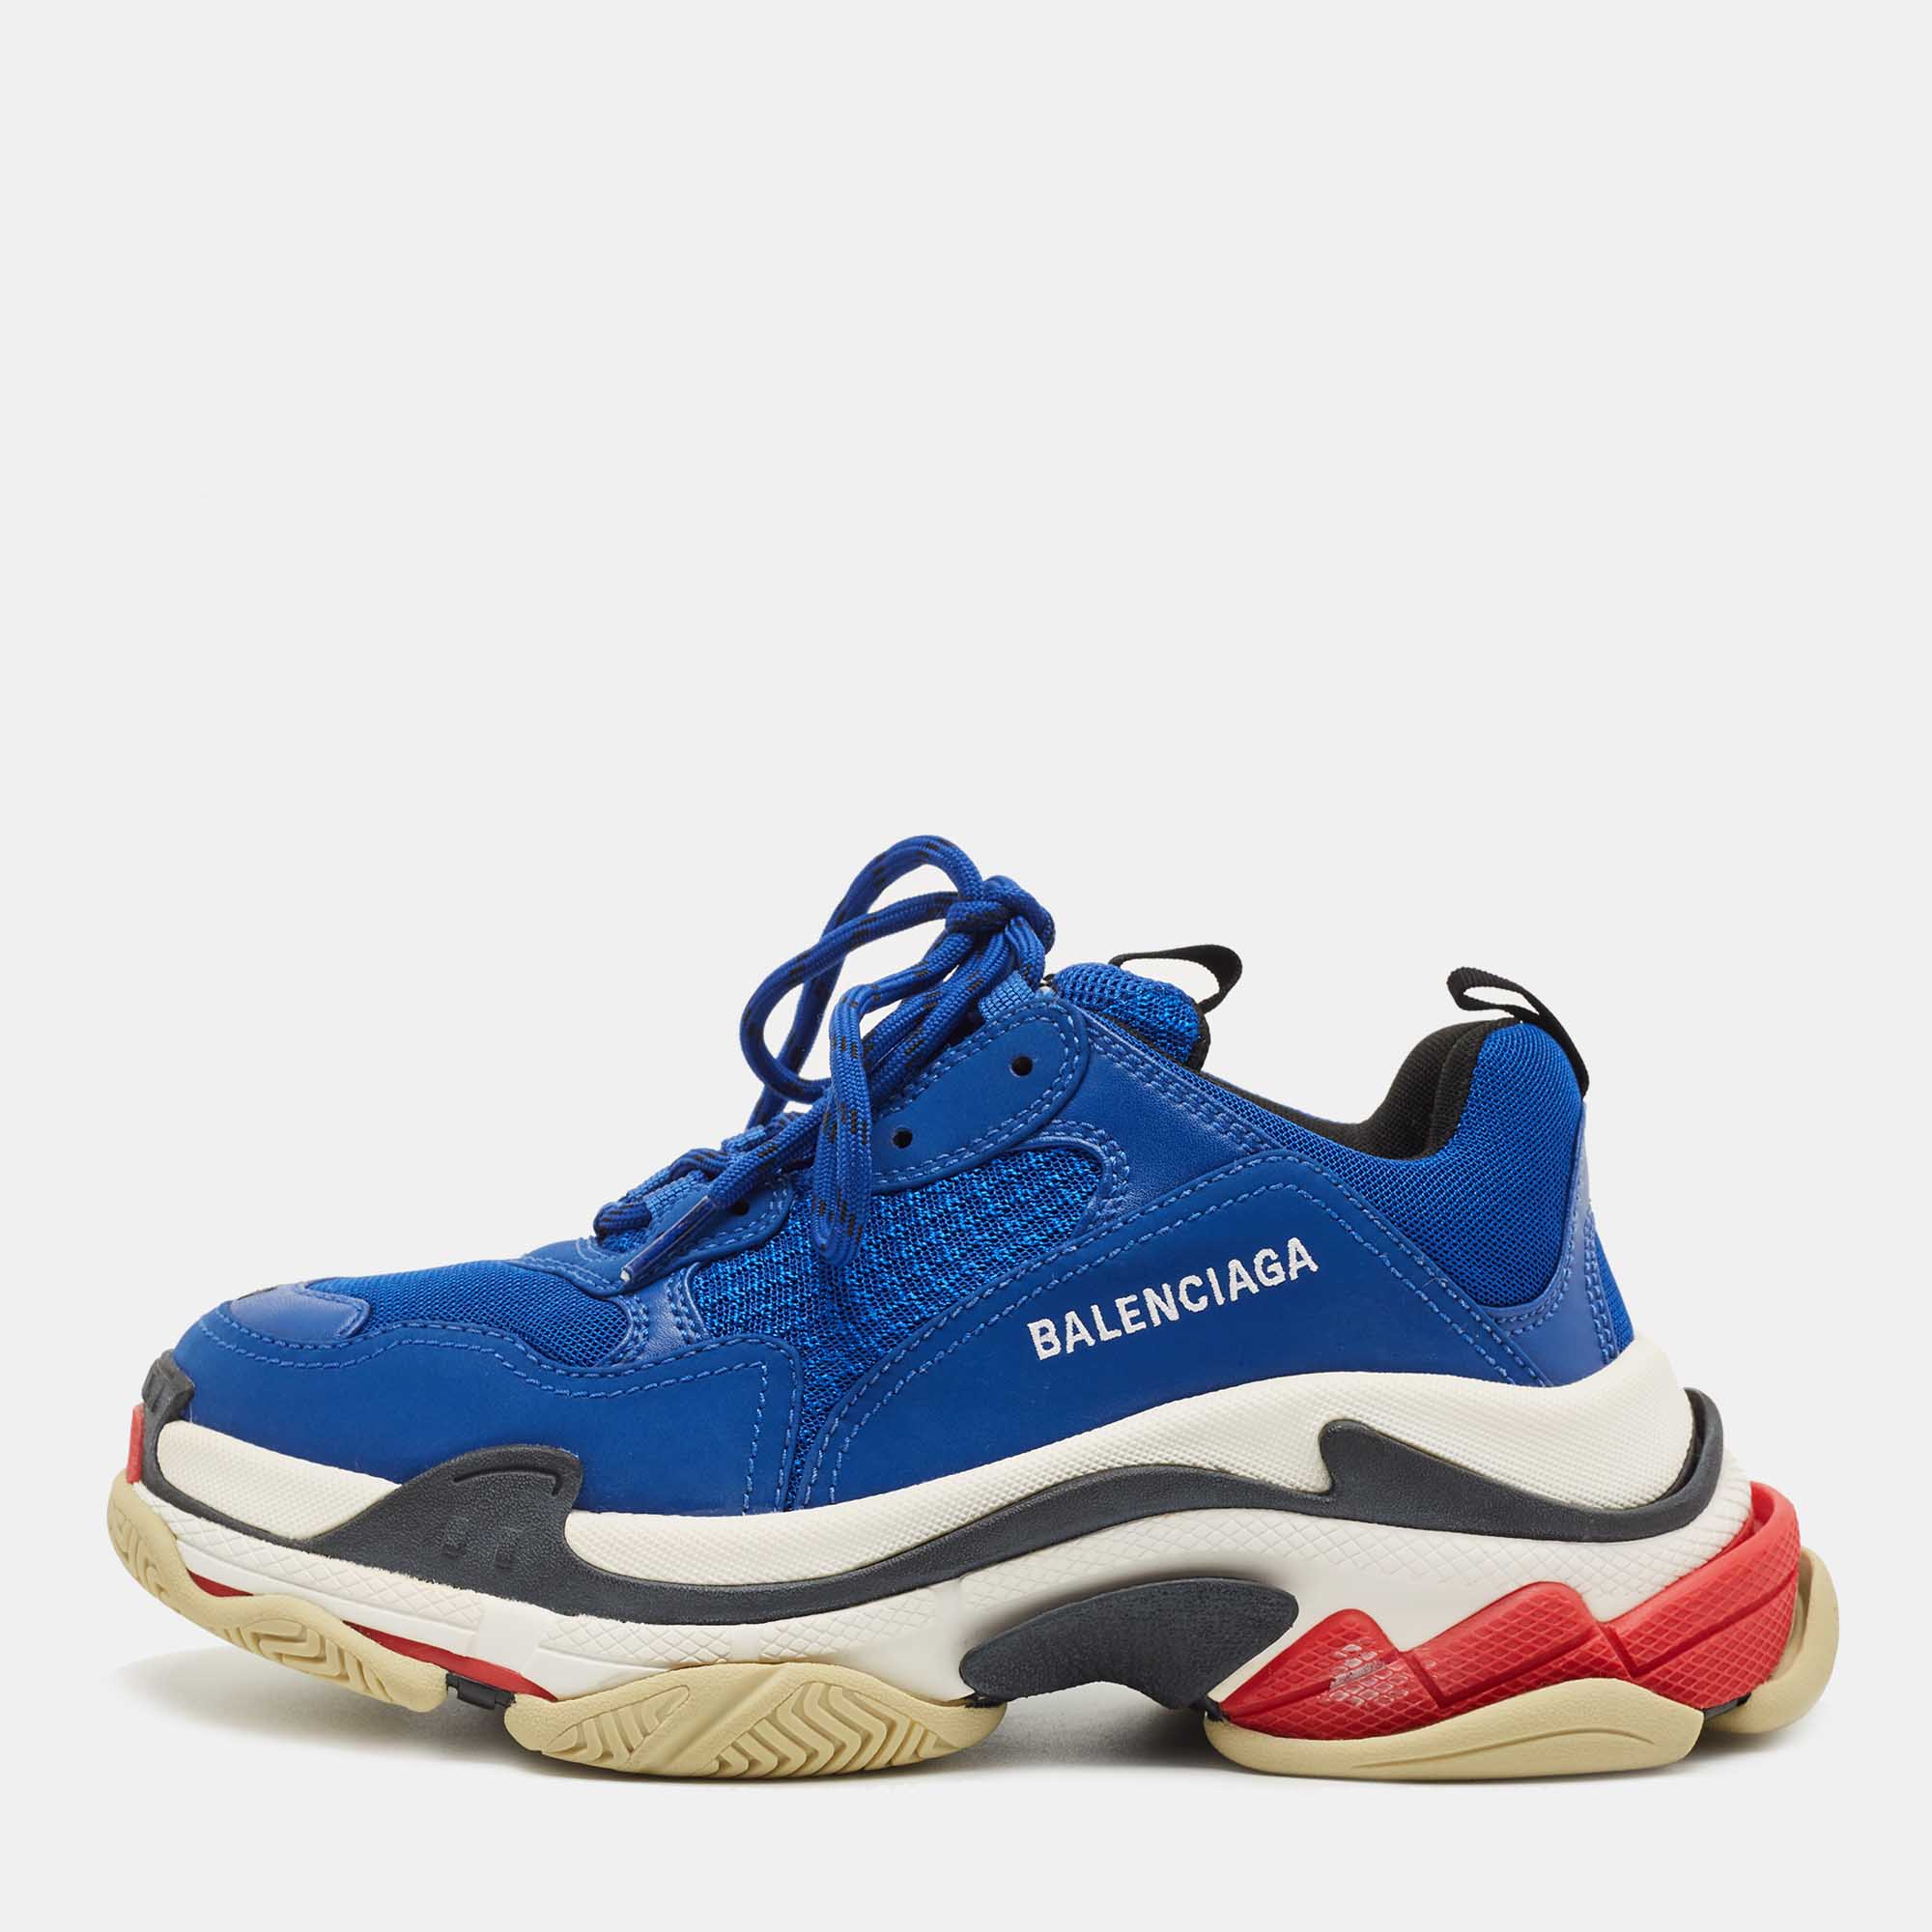 Balenciaga Blue Mesh And Leather Triple S Sneakers Size 40